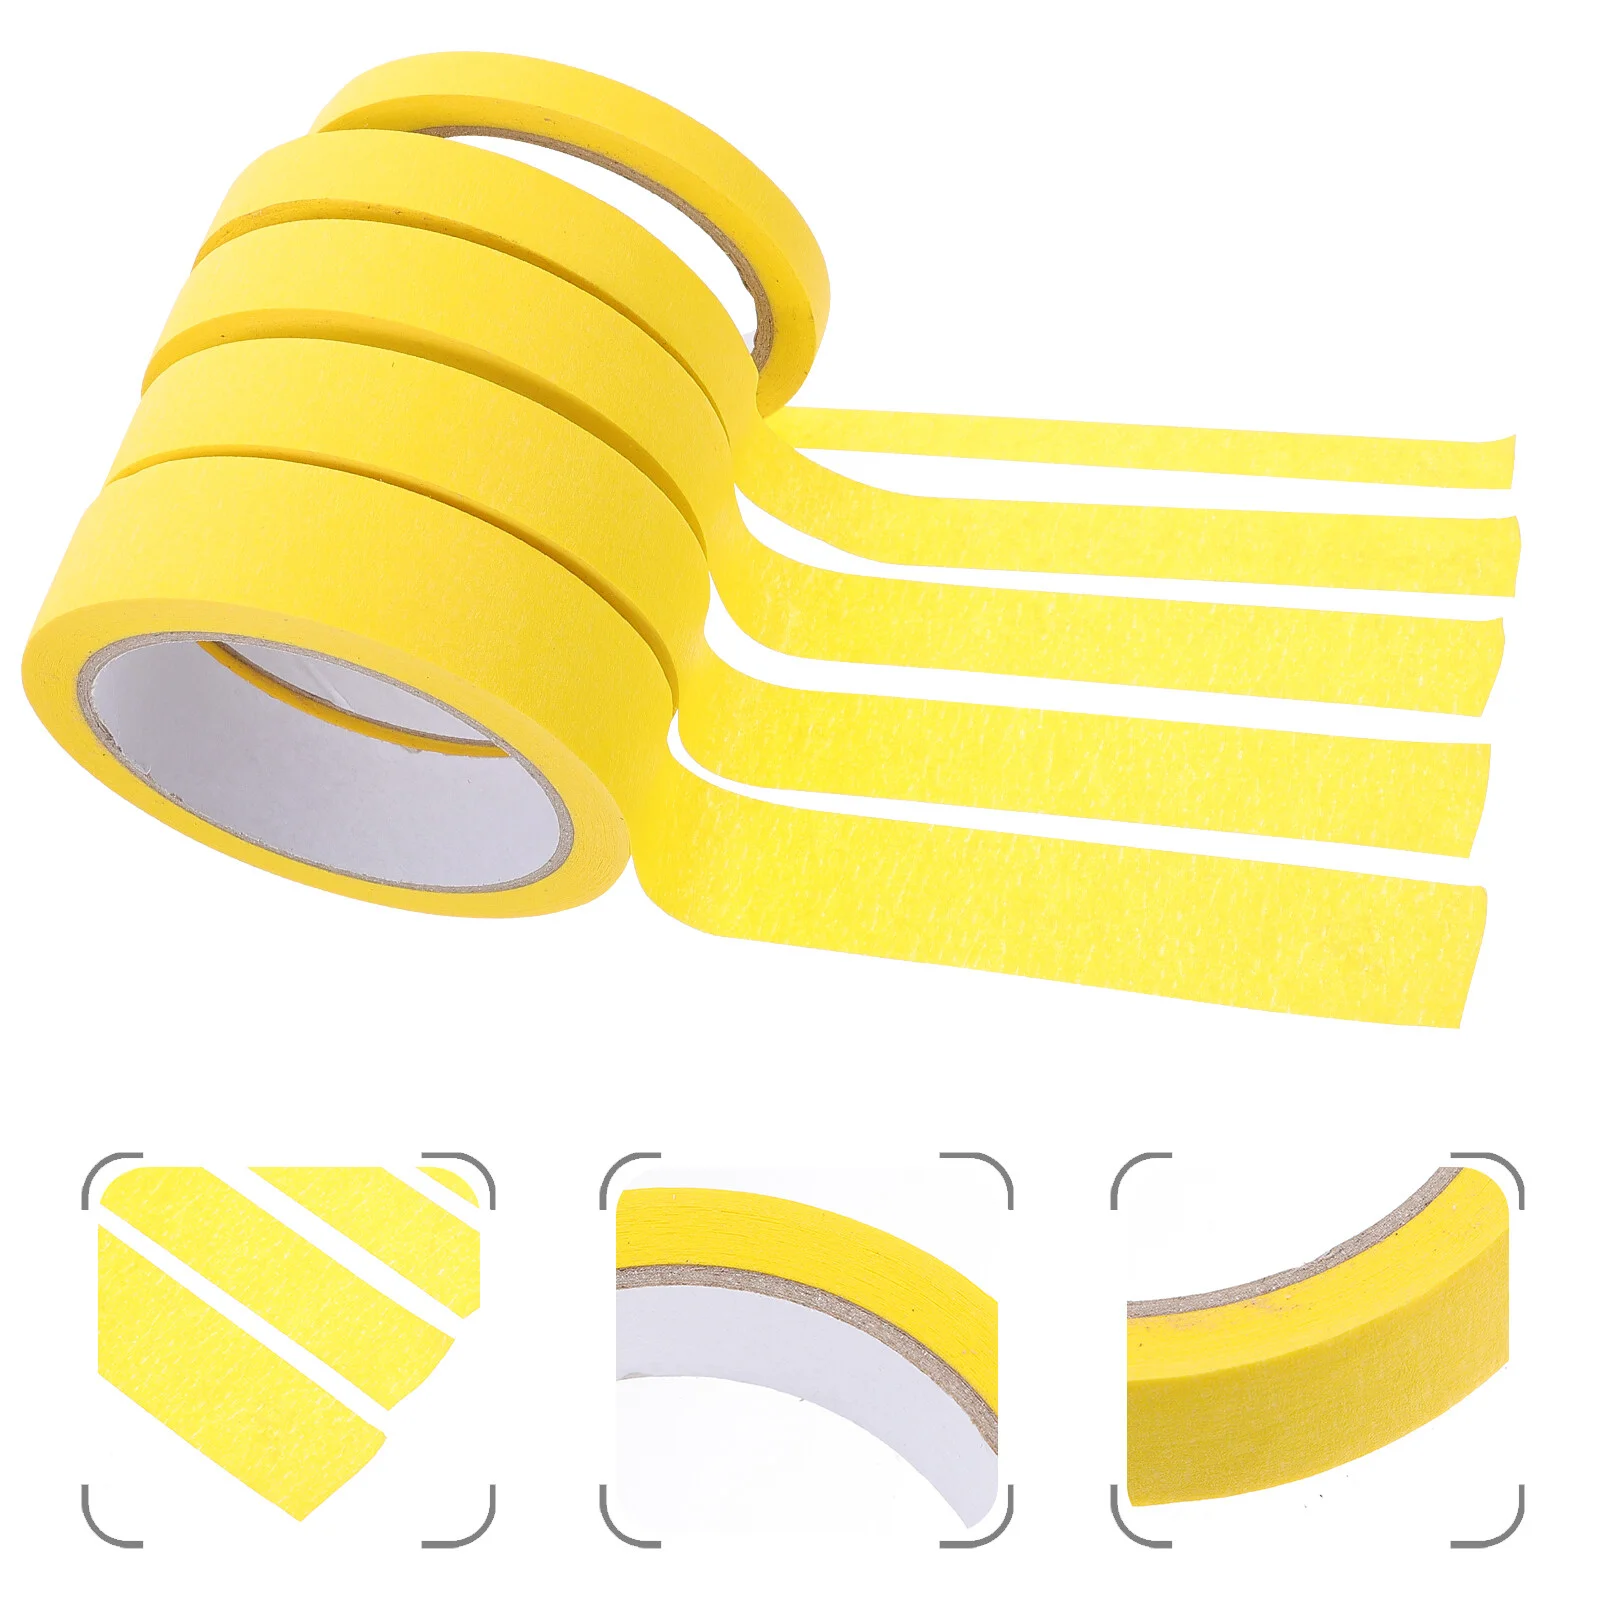 

5 Rolls Masking Tape Self-adhesive Tapes Colorful Duct Textured Paper Easy-tear Painter Crepe Spray